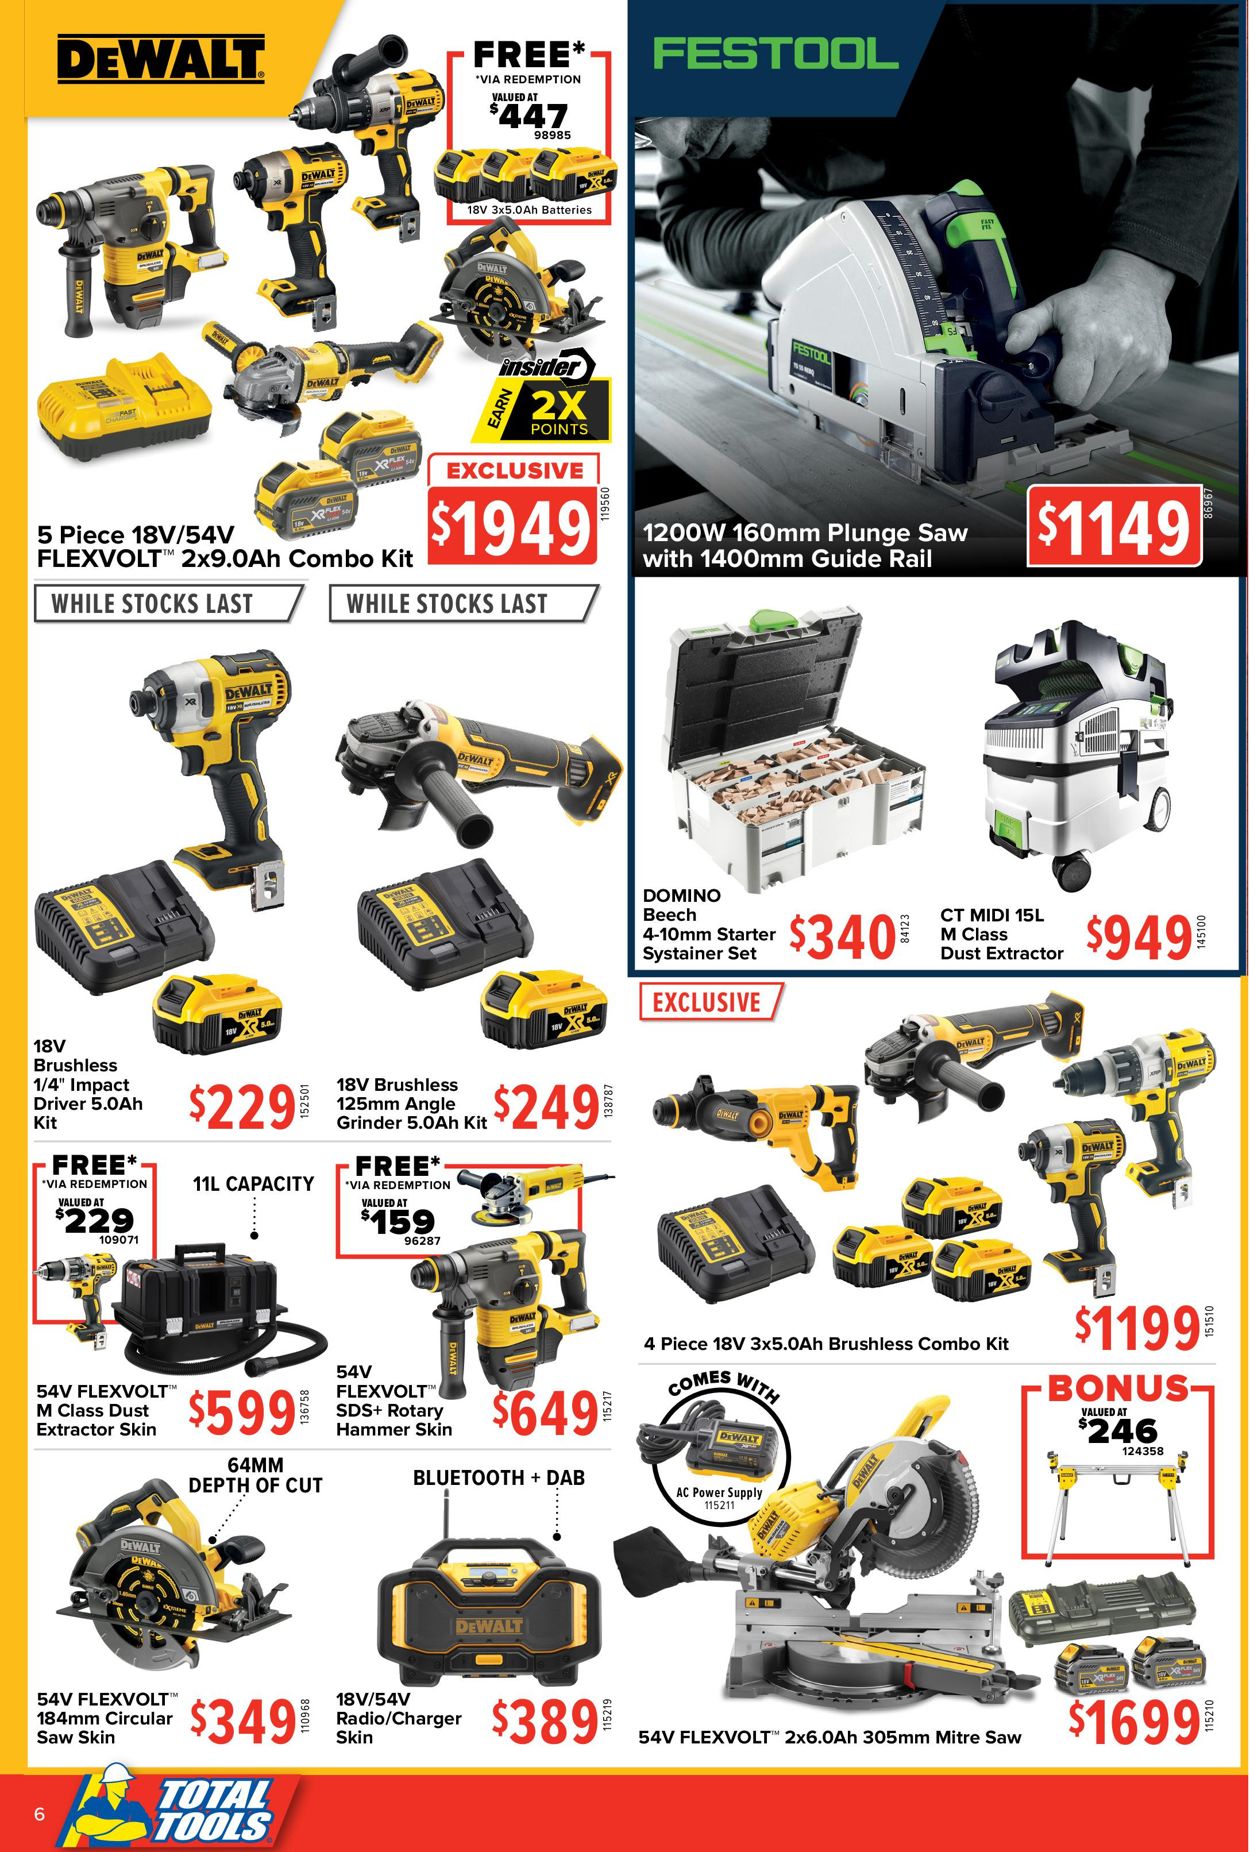 Total Tools - Christmas 2020 Catalogue - 30/11-24/12/2020 (Page 6)